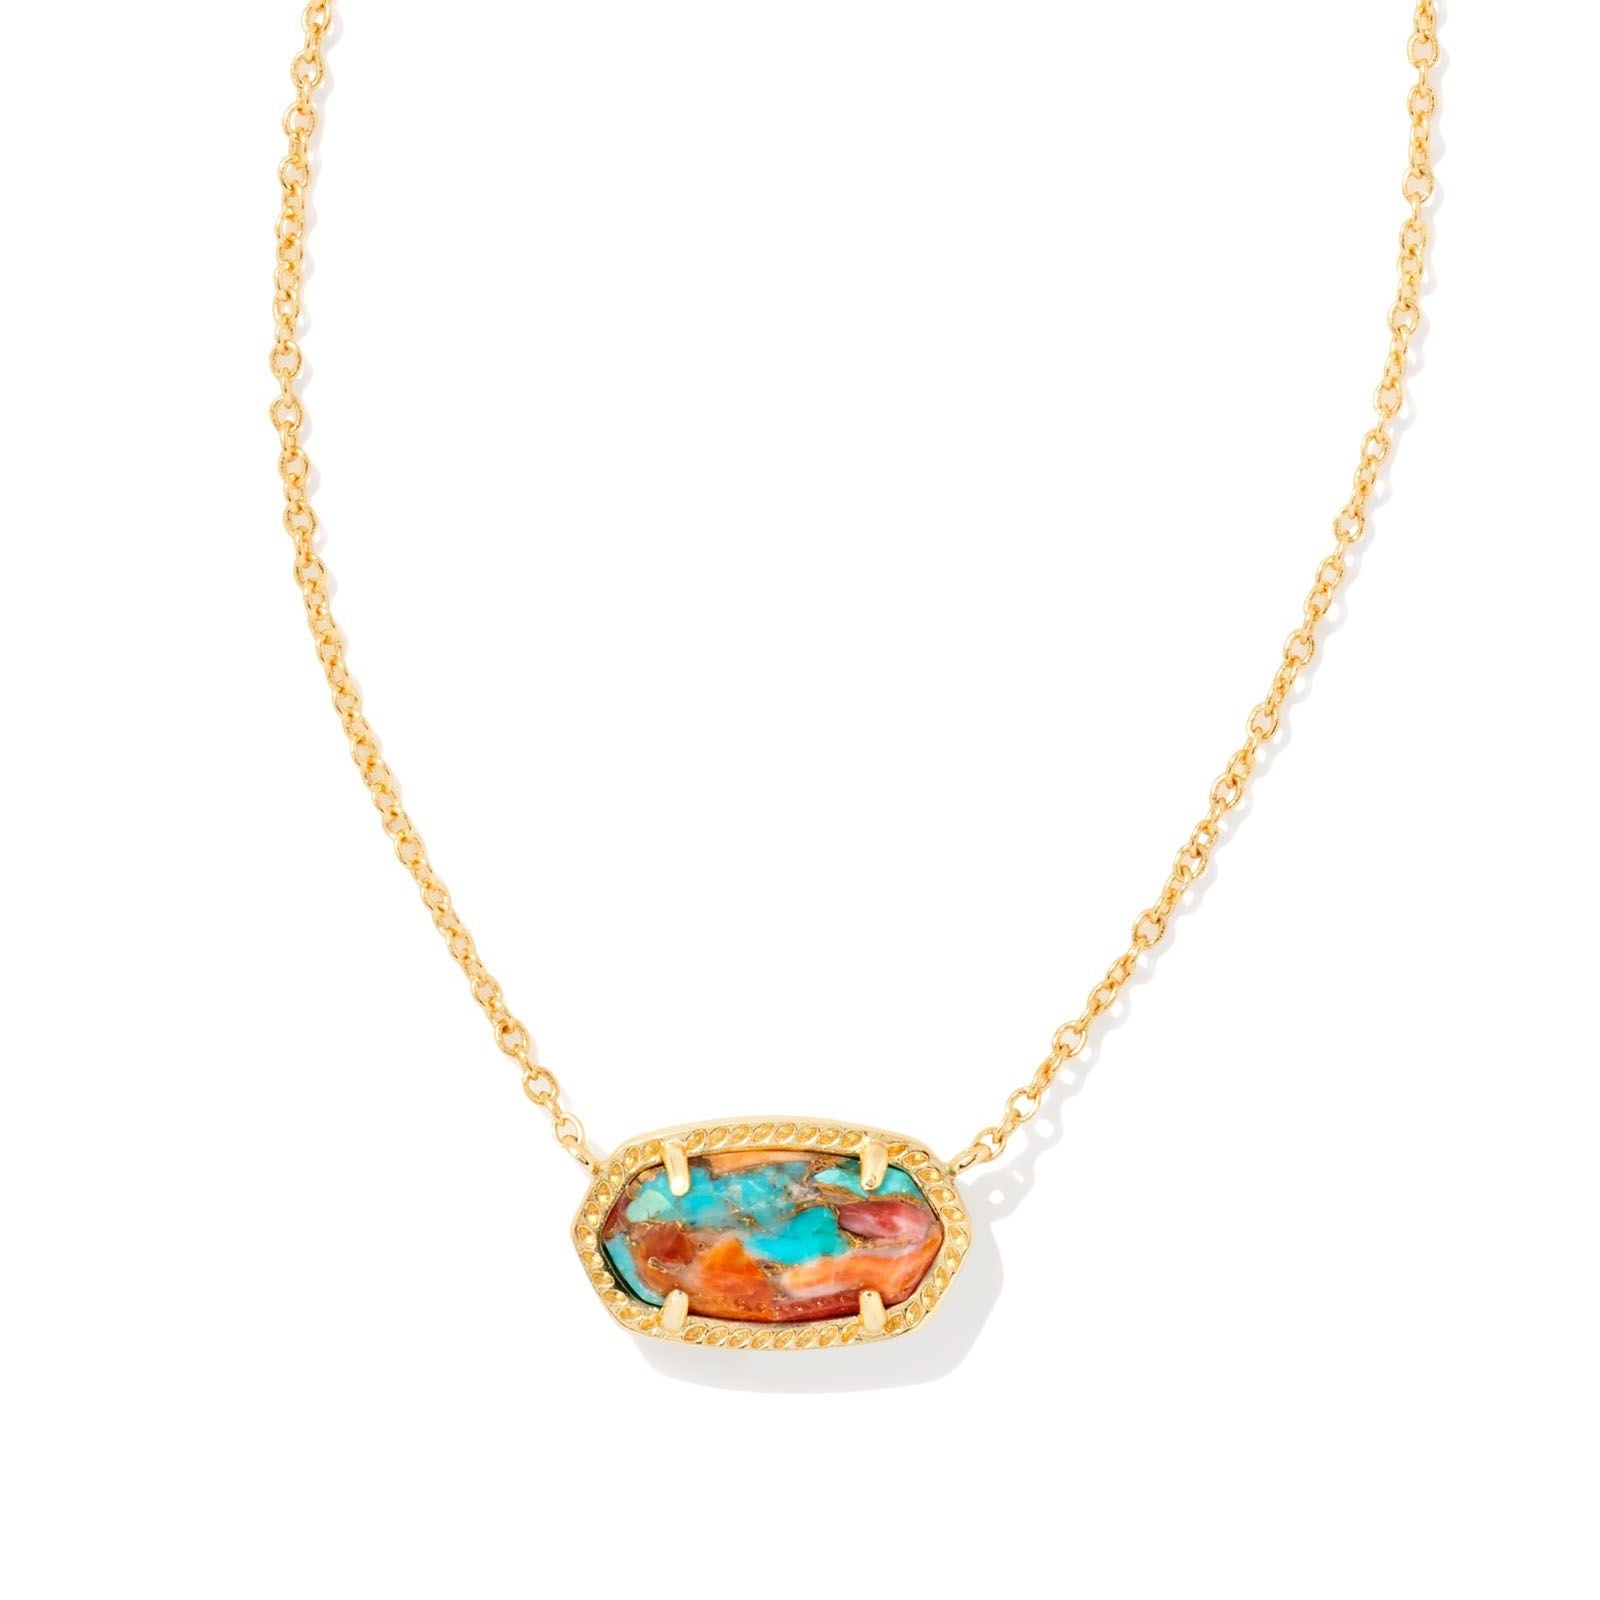 Kendra Scott | Elisa Gold Pendant Necklace in Bronze Veined Turquoise Magnesite Red Oyster - Giddy Up Glamour Boutique